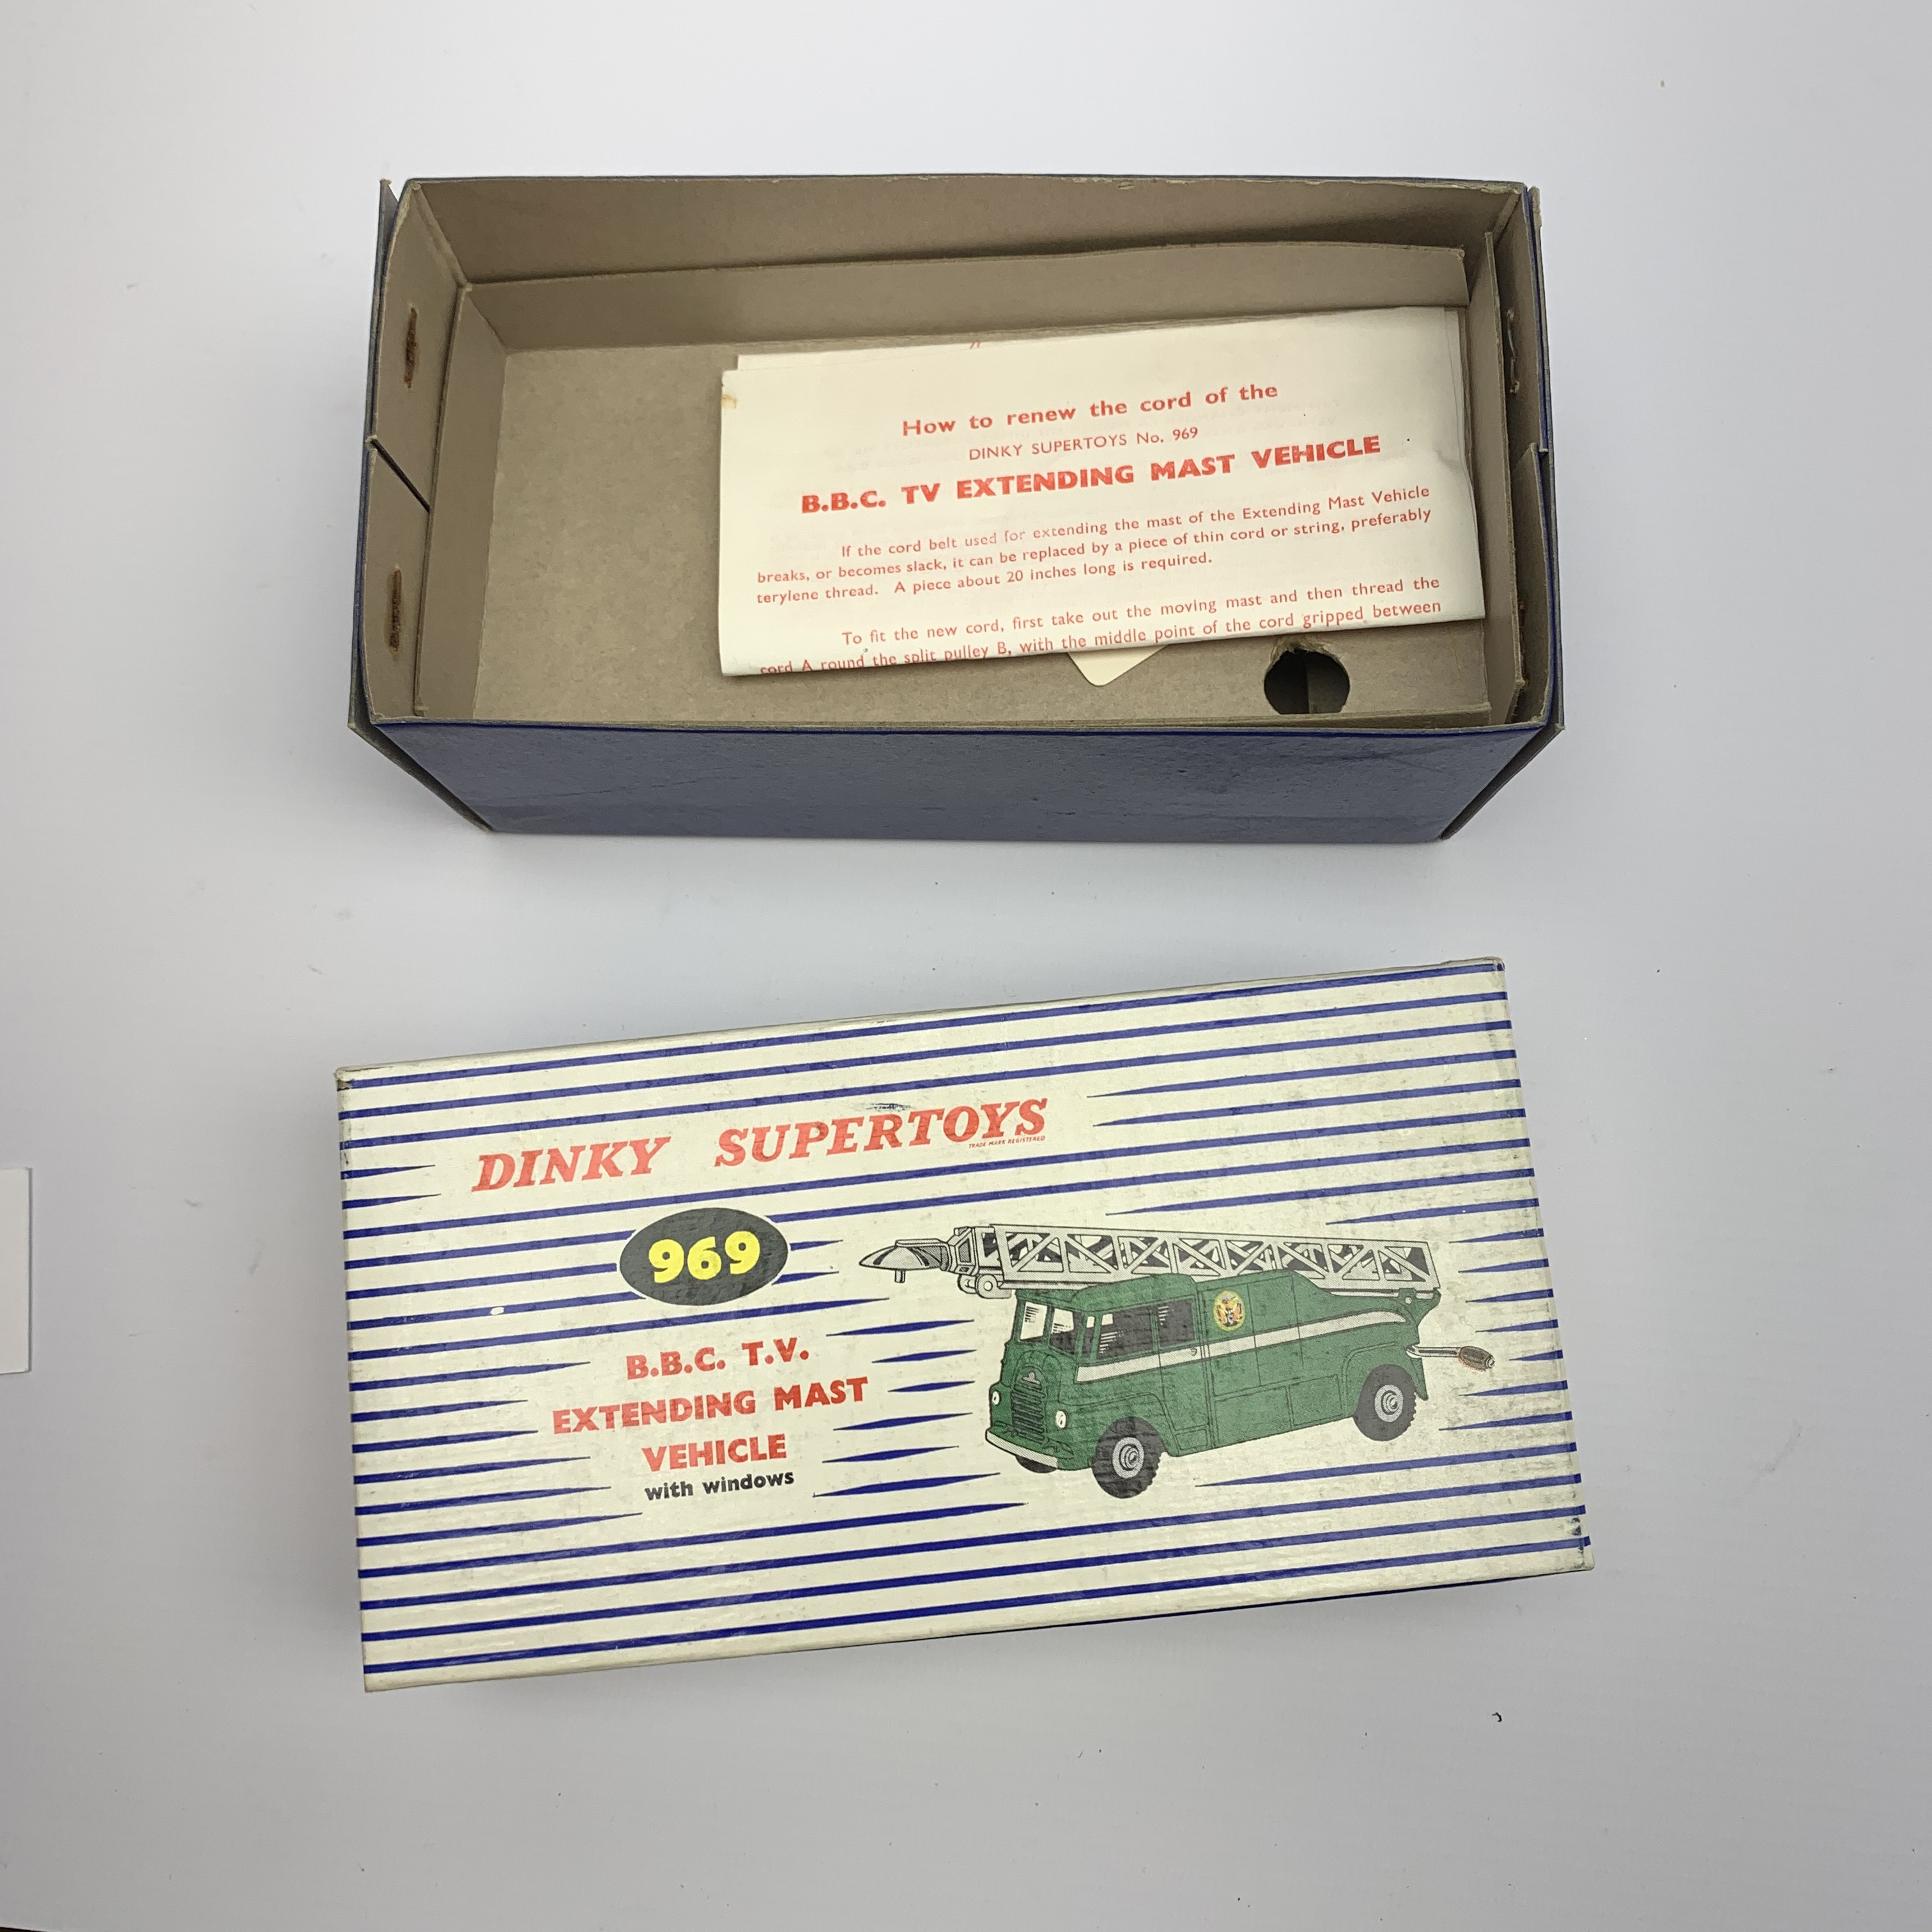 Dinky - Supertoys B.B.C. T.V. Extending Mast Vehicle, No.969, boxed with internal packaging and ins - Image 8 of 8